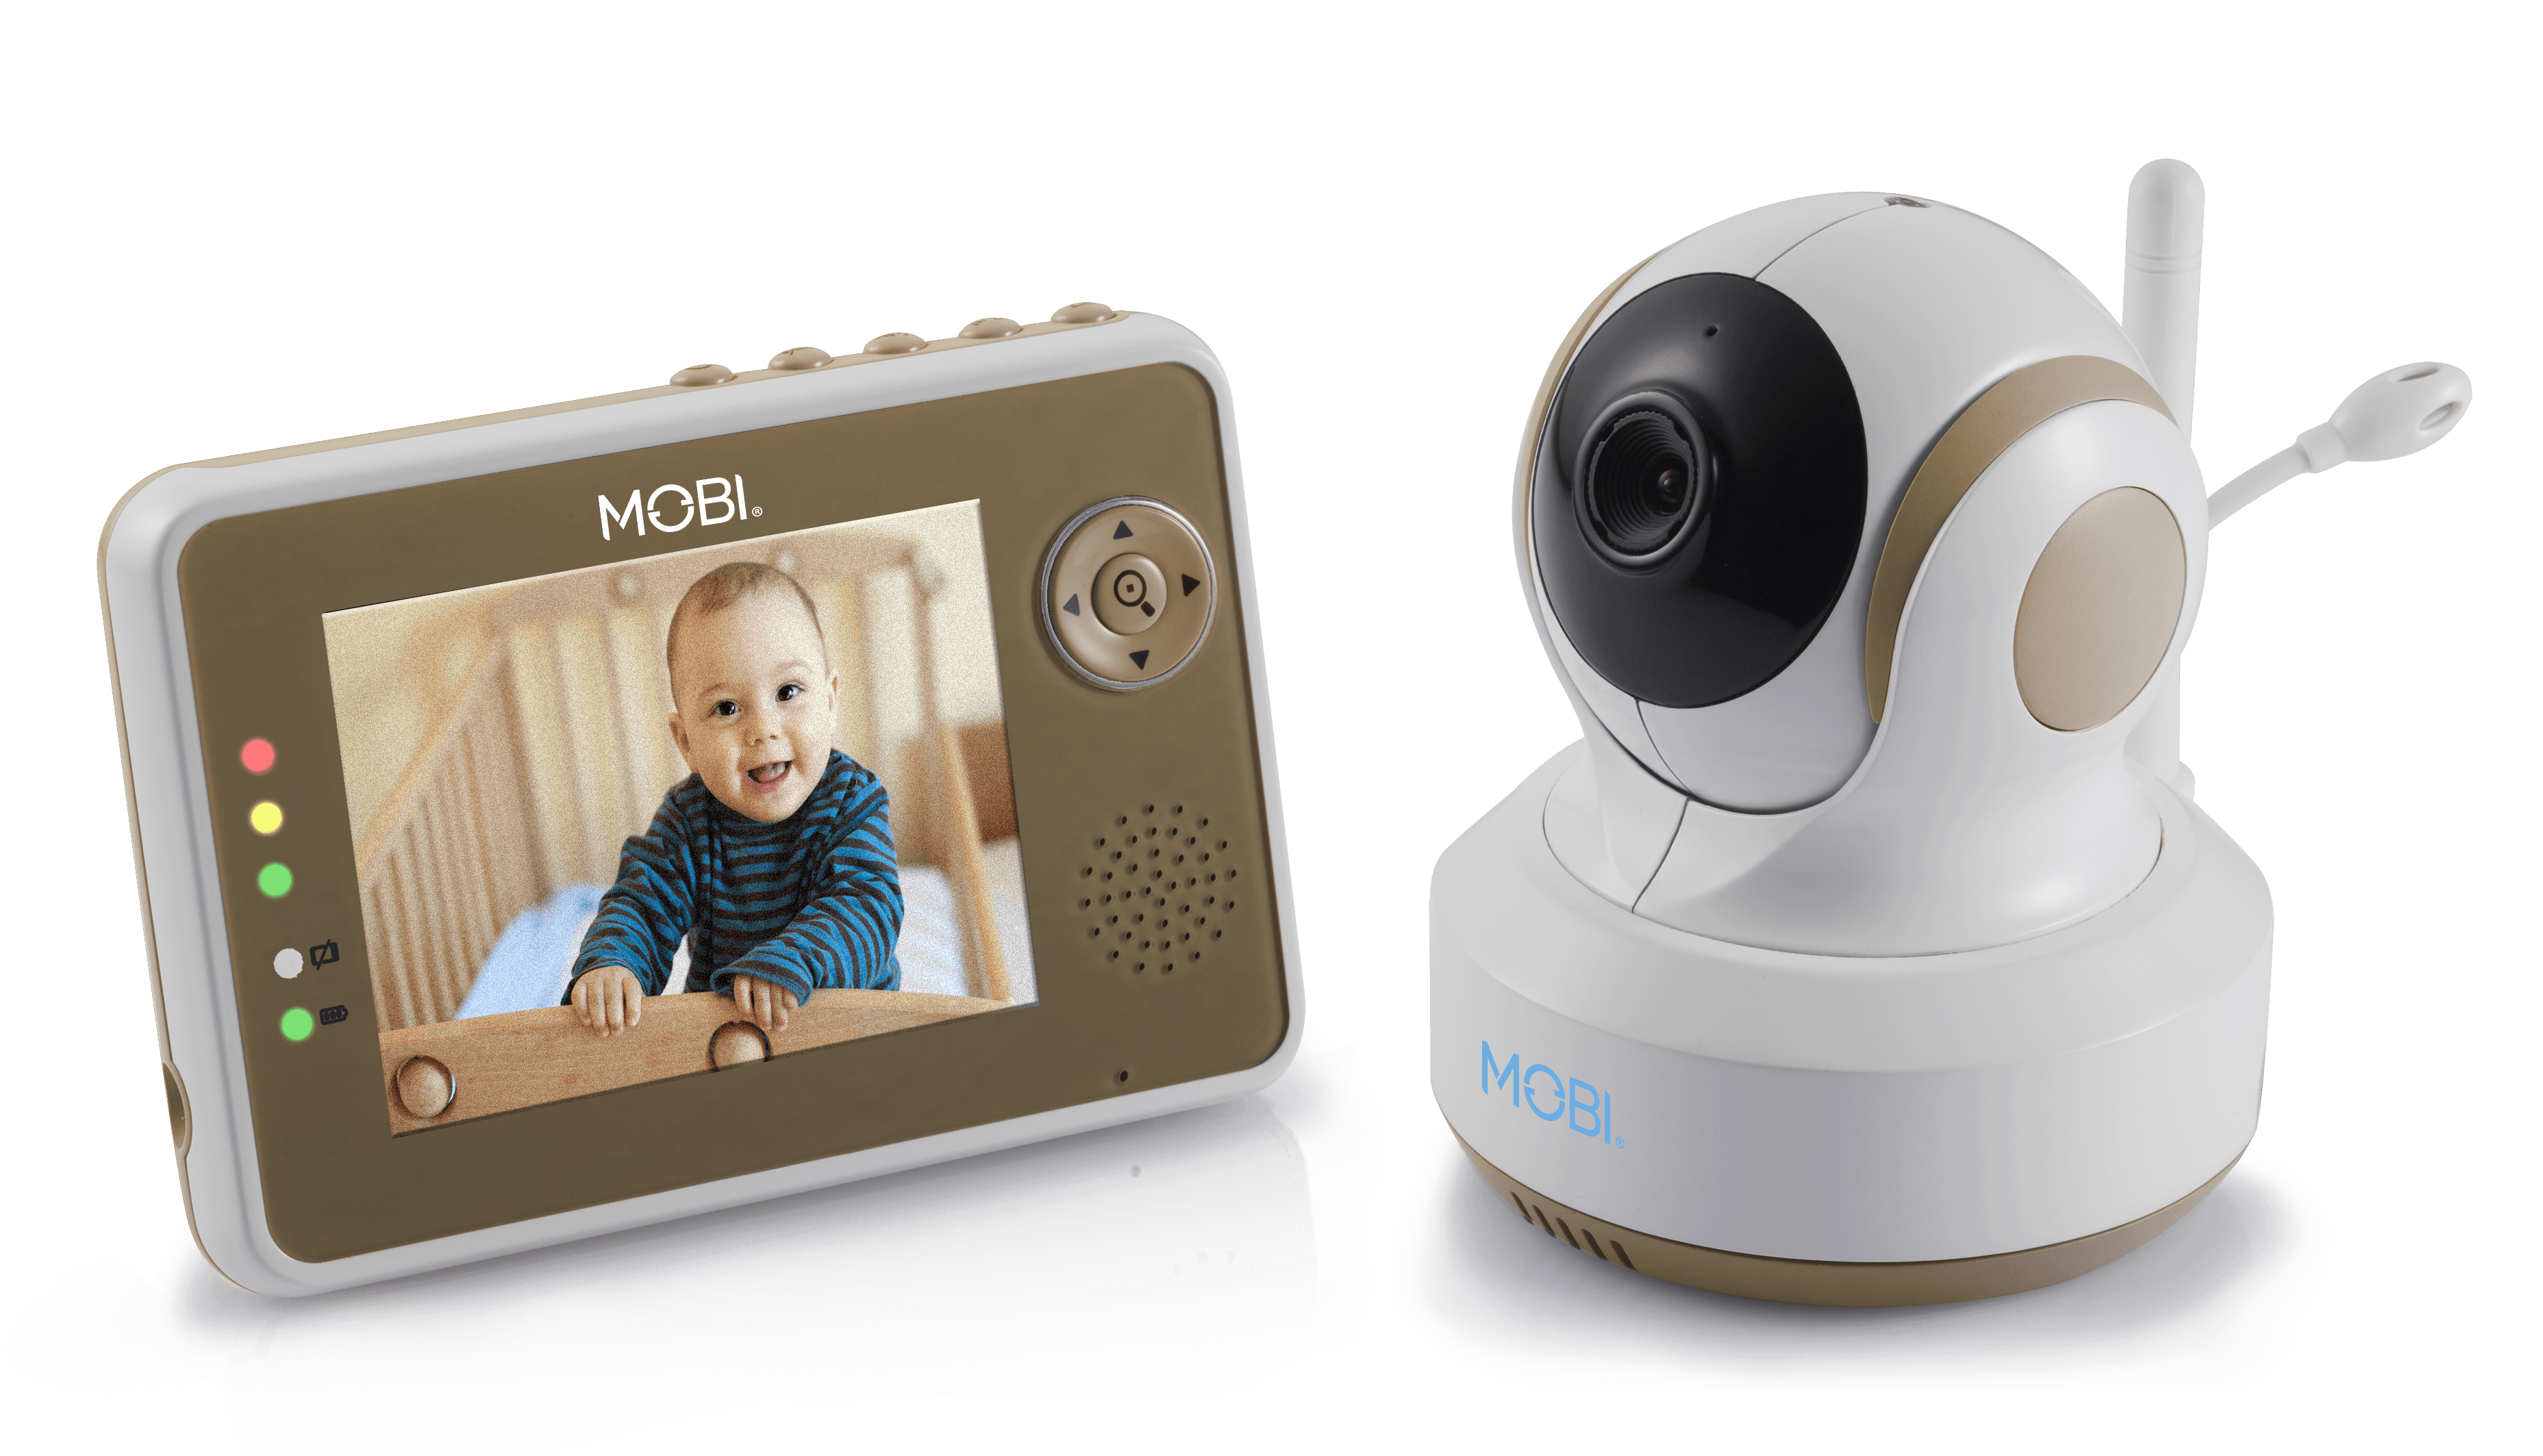 MobiCam DXR-M1 Baby Monitoring System With Smart Auto Tracking, Room Temperature, Lullabies - image 1 of 7